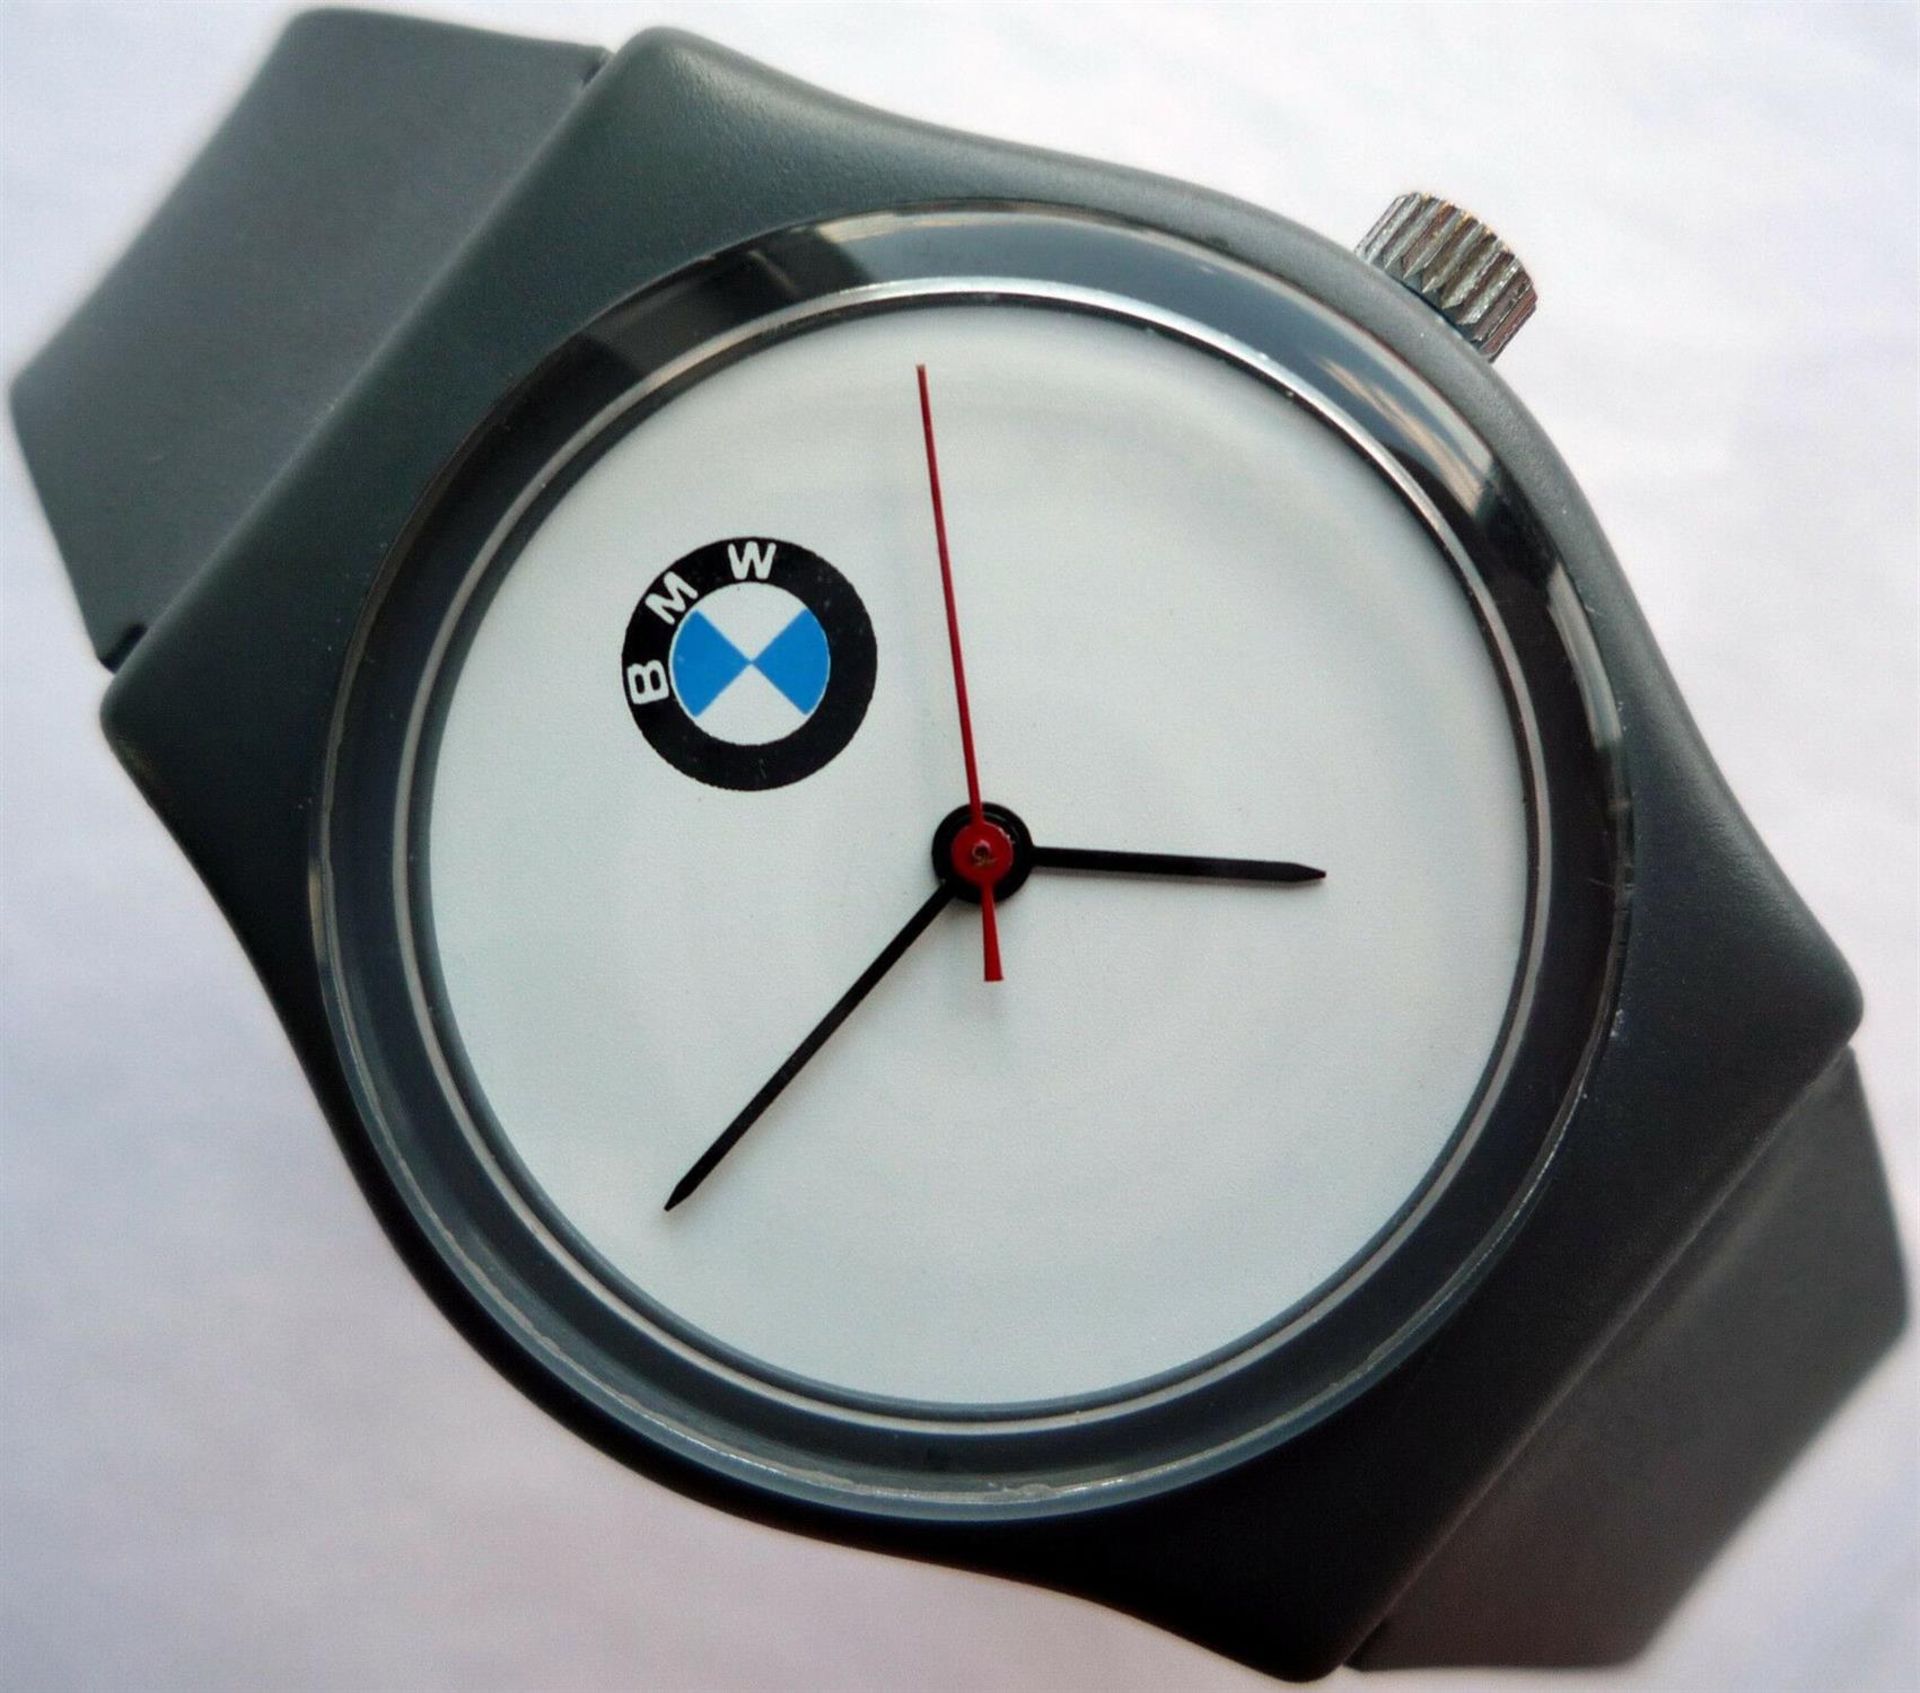 BMW retro-design Silicone Band Watch - Image 2 of 5